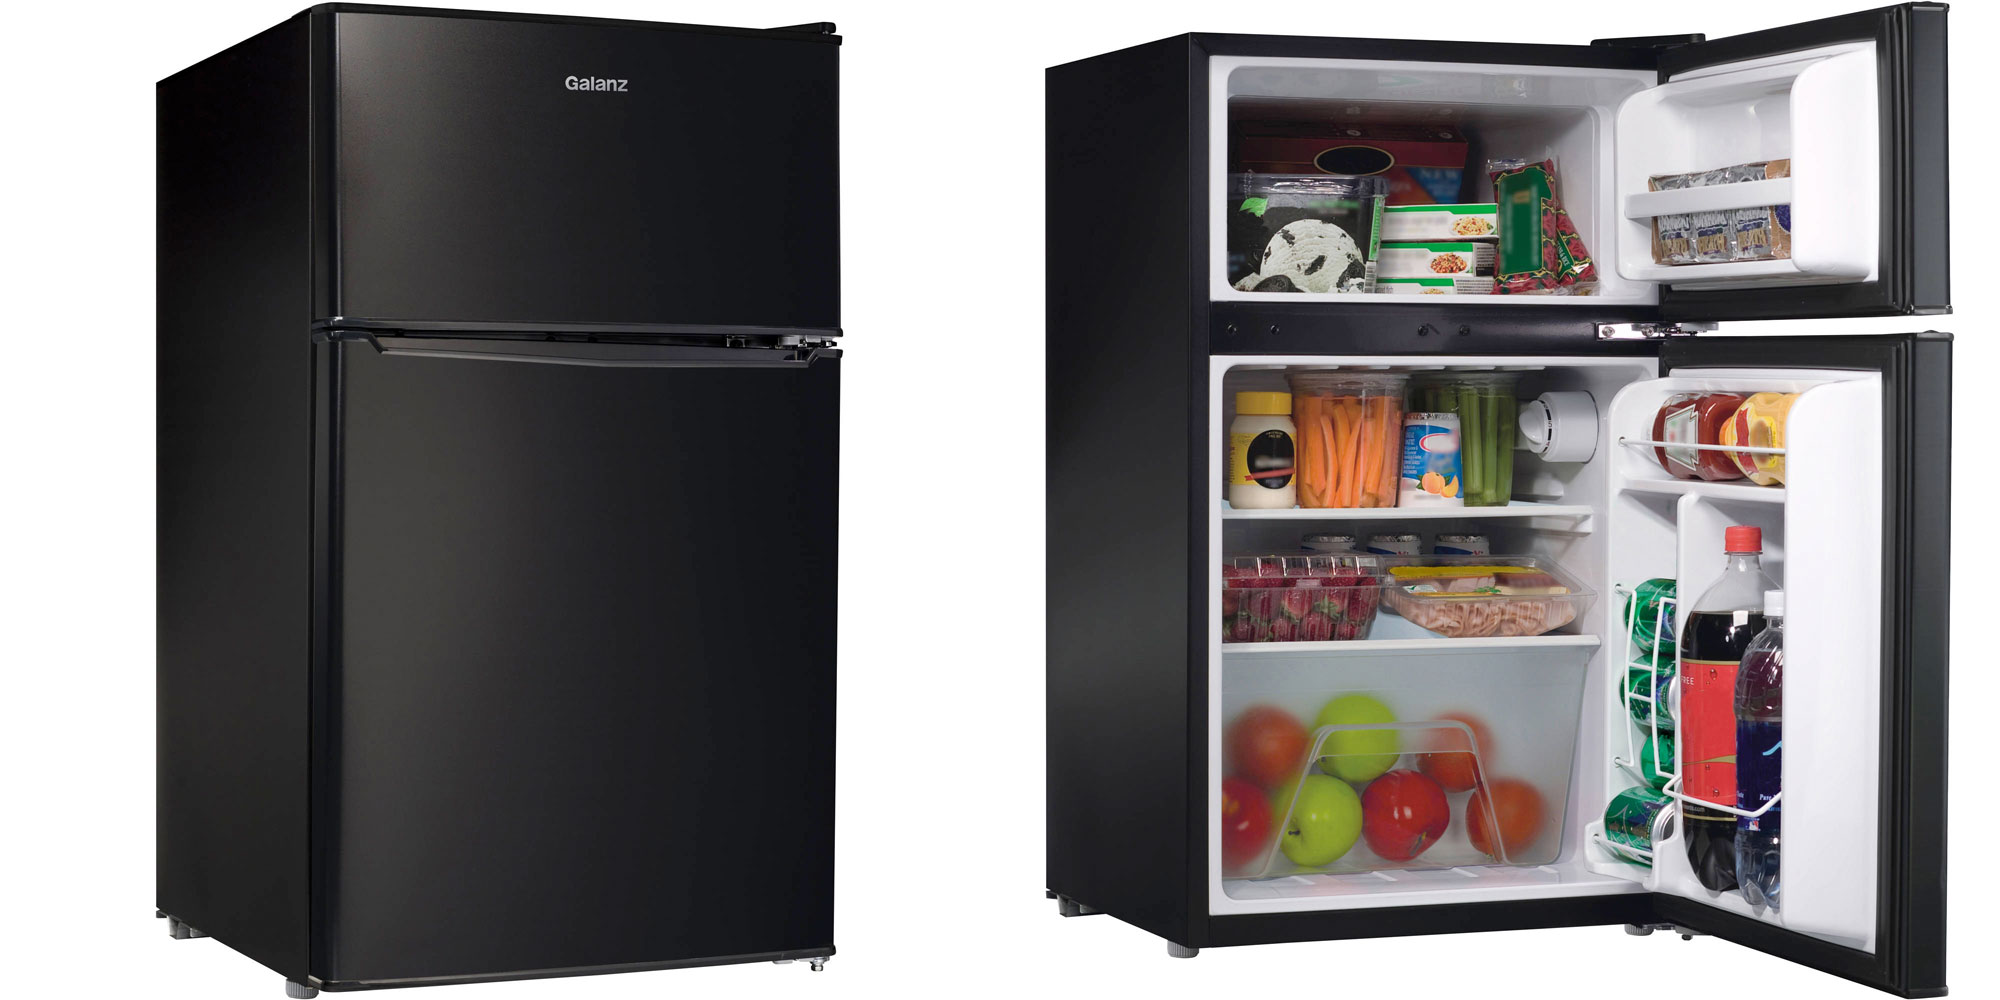 This 3.1-Cu. Ft. mini fridge is perfect for the dorm or the garage at